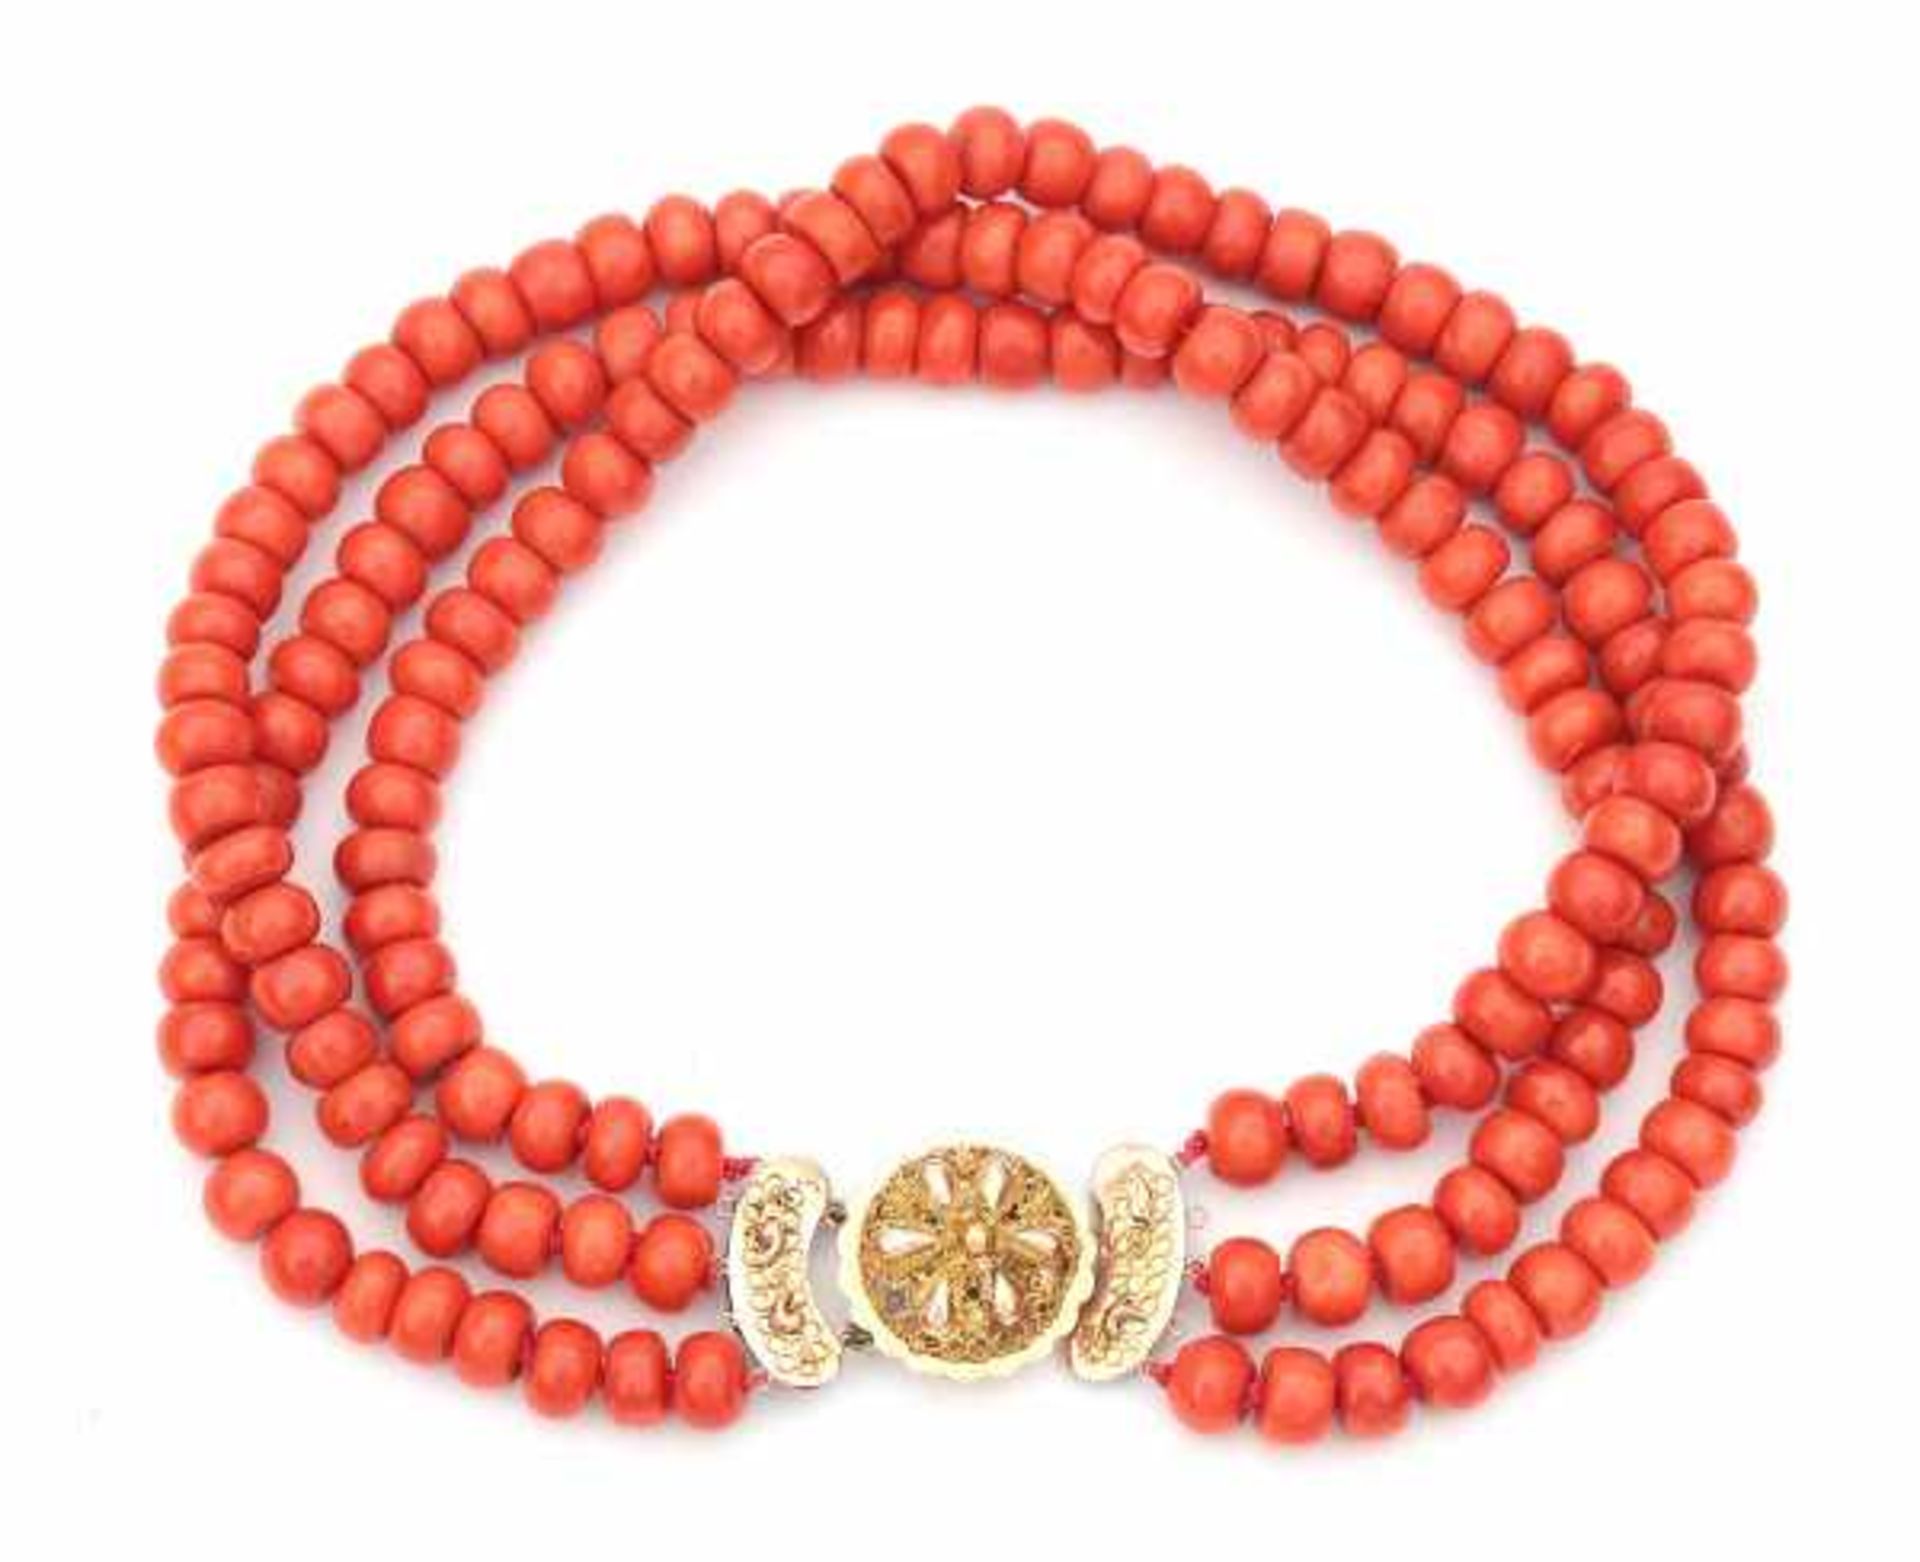 A three strand precious coral necklace with 14 carat rose and yellow gold clasp. The strands are